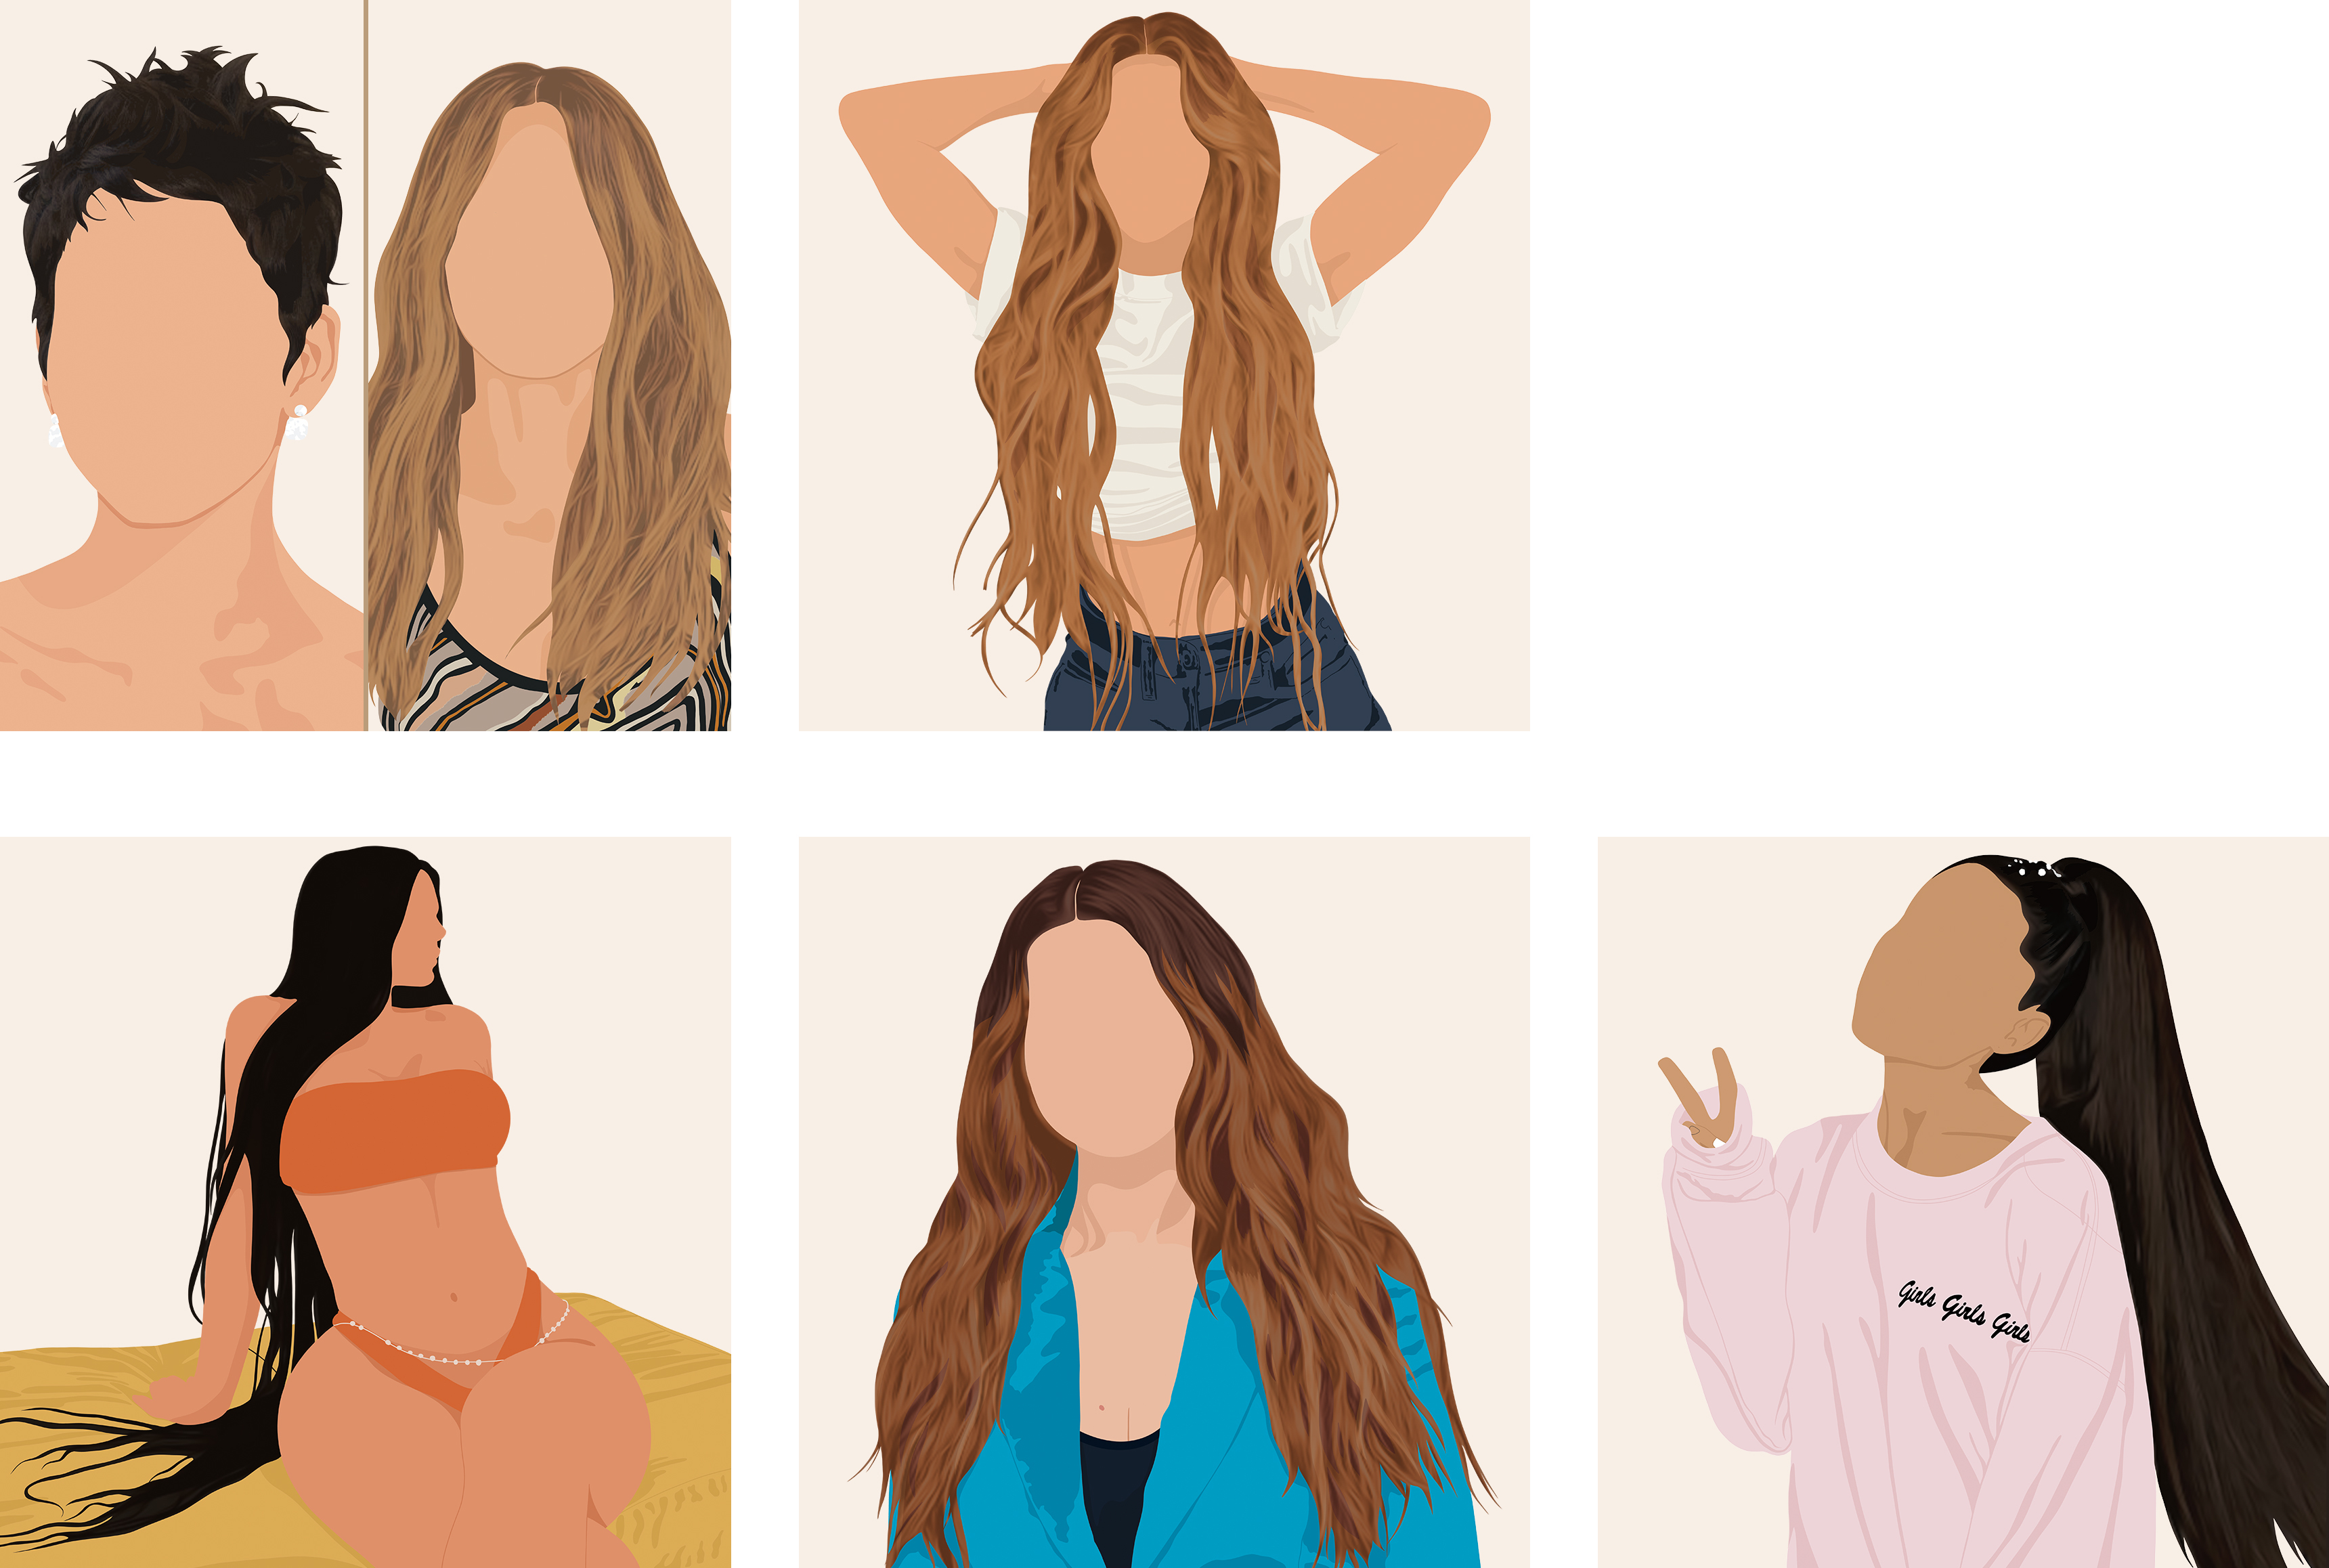 Collage of sketches of celebrities who wear hair extensions